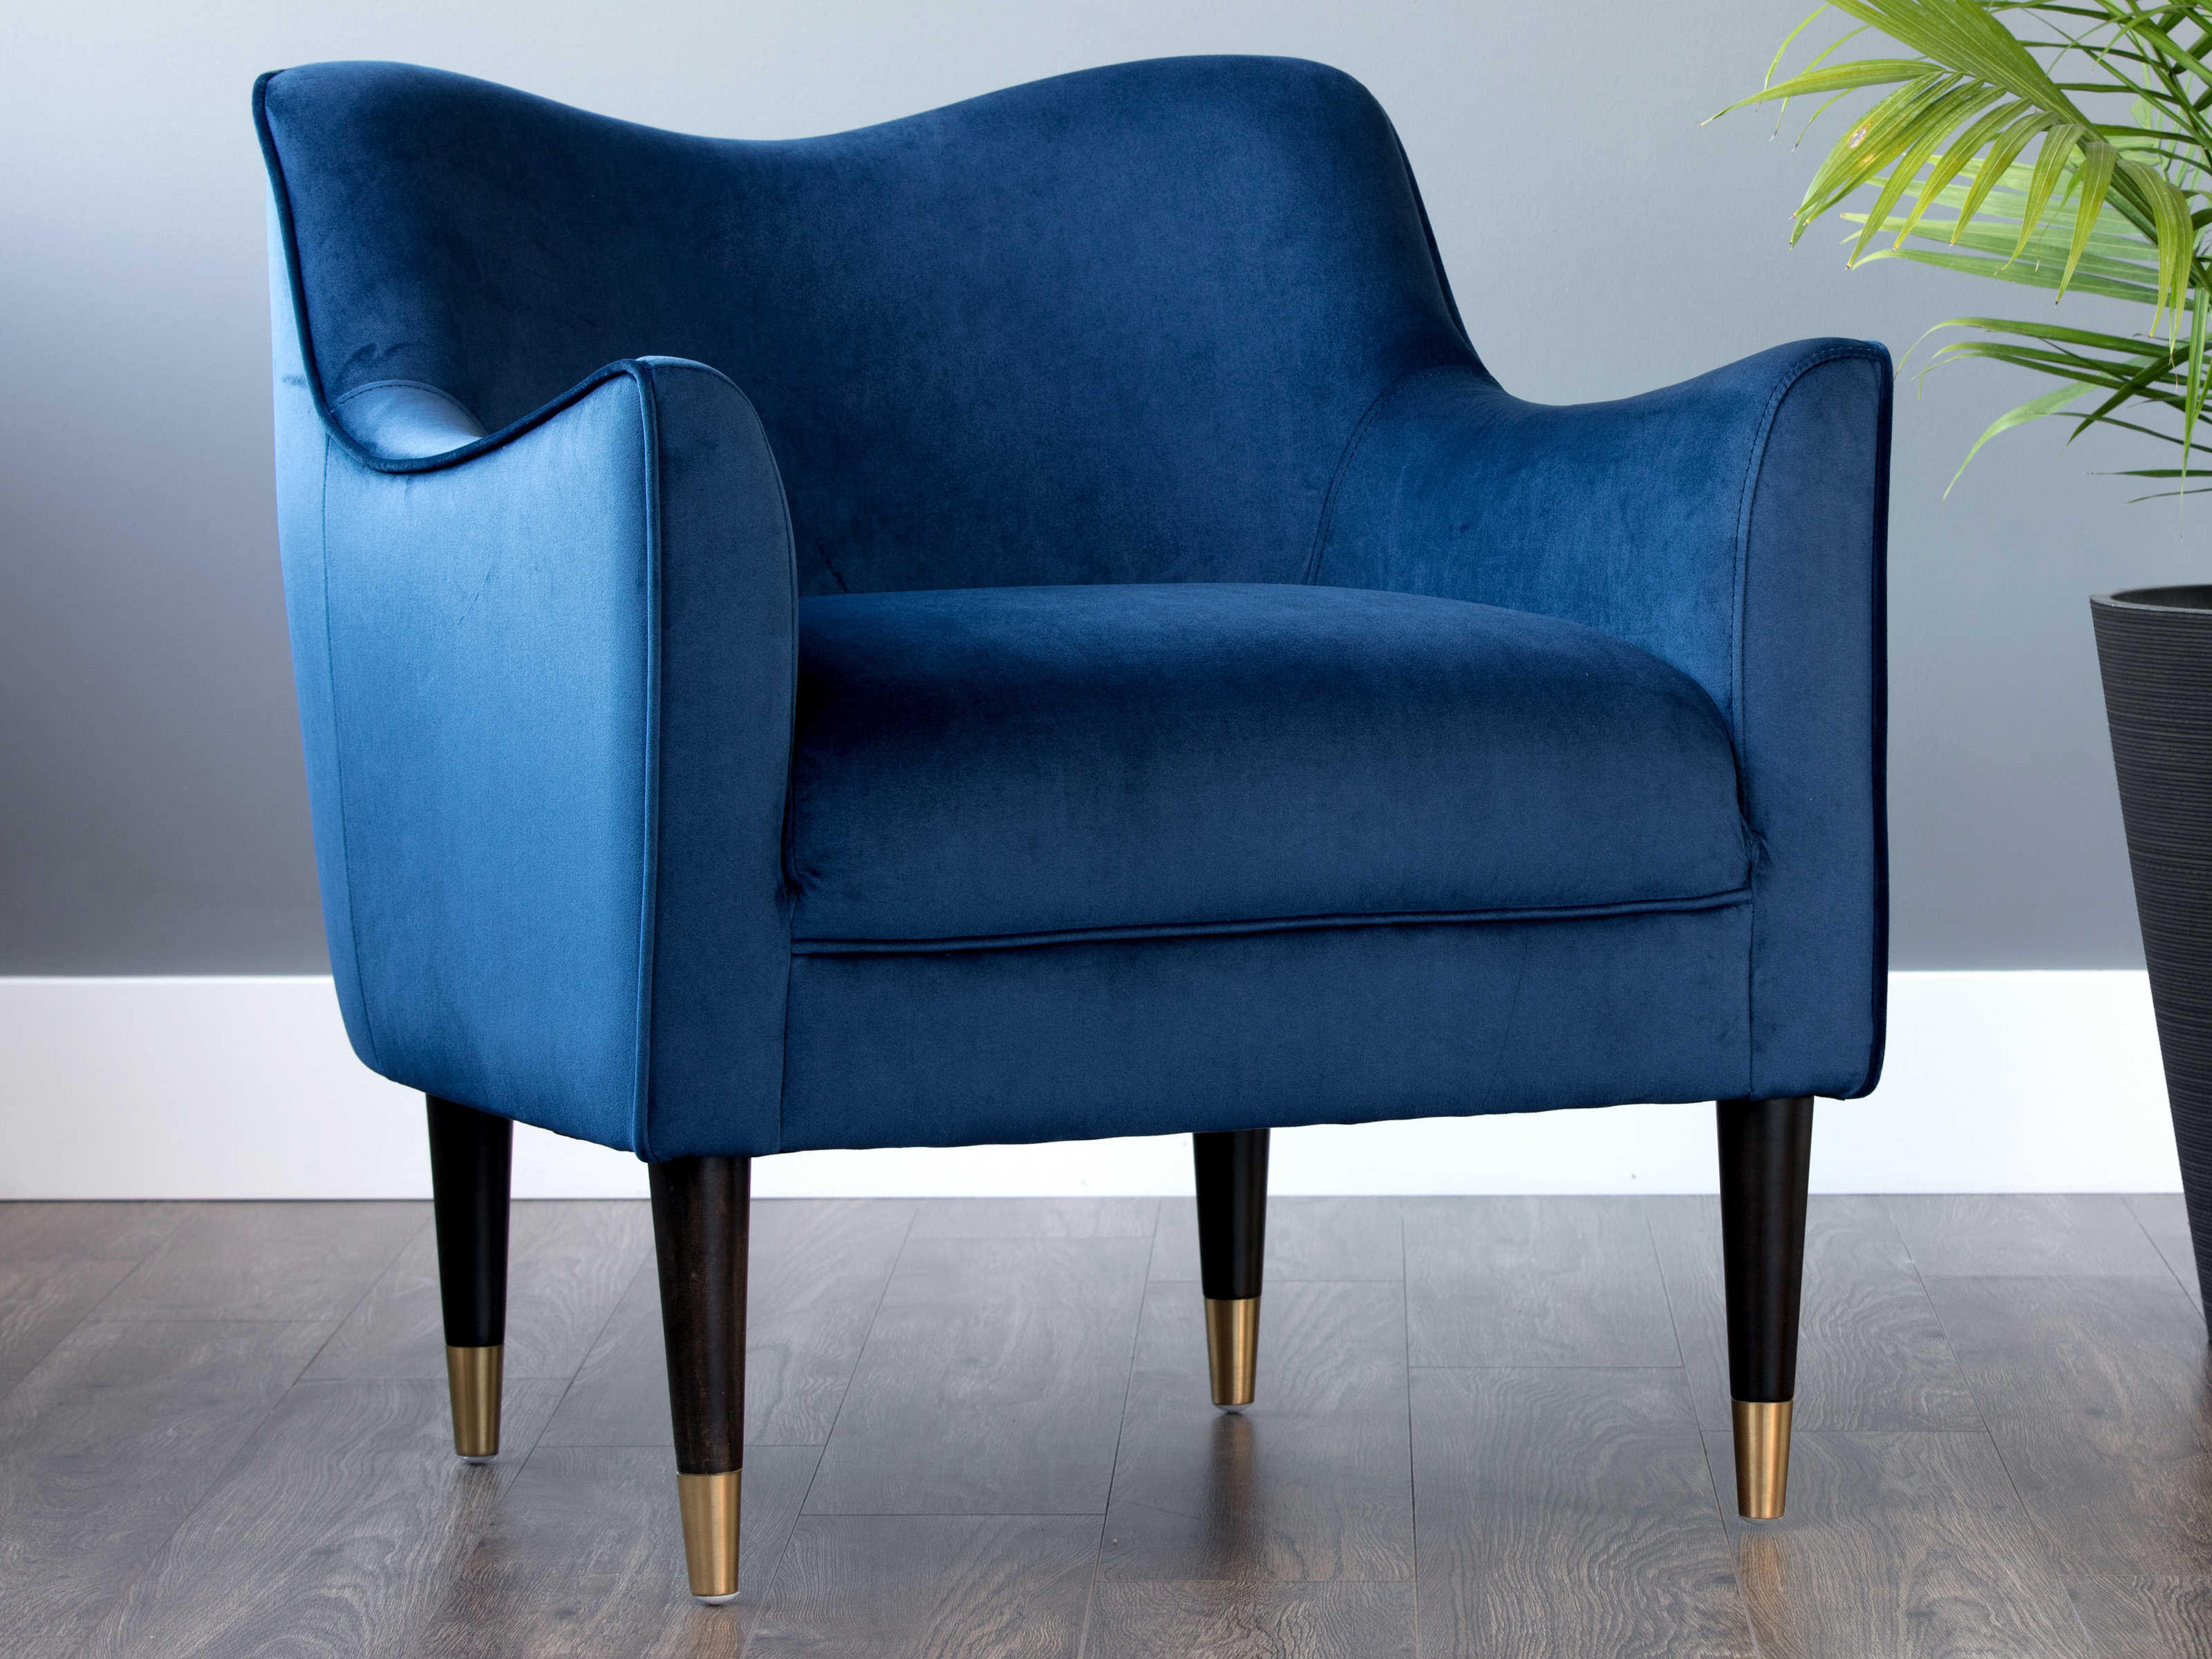 Blue Navy Accent Chair Living Room